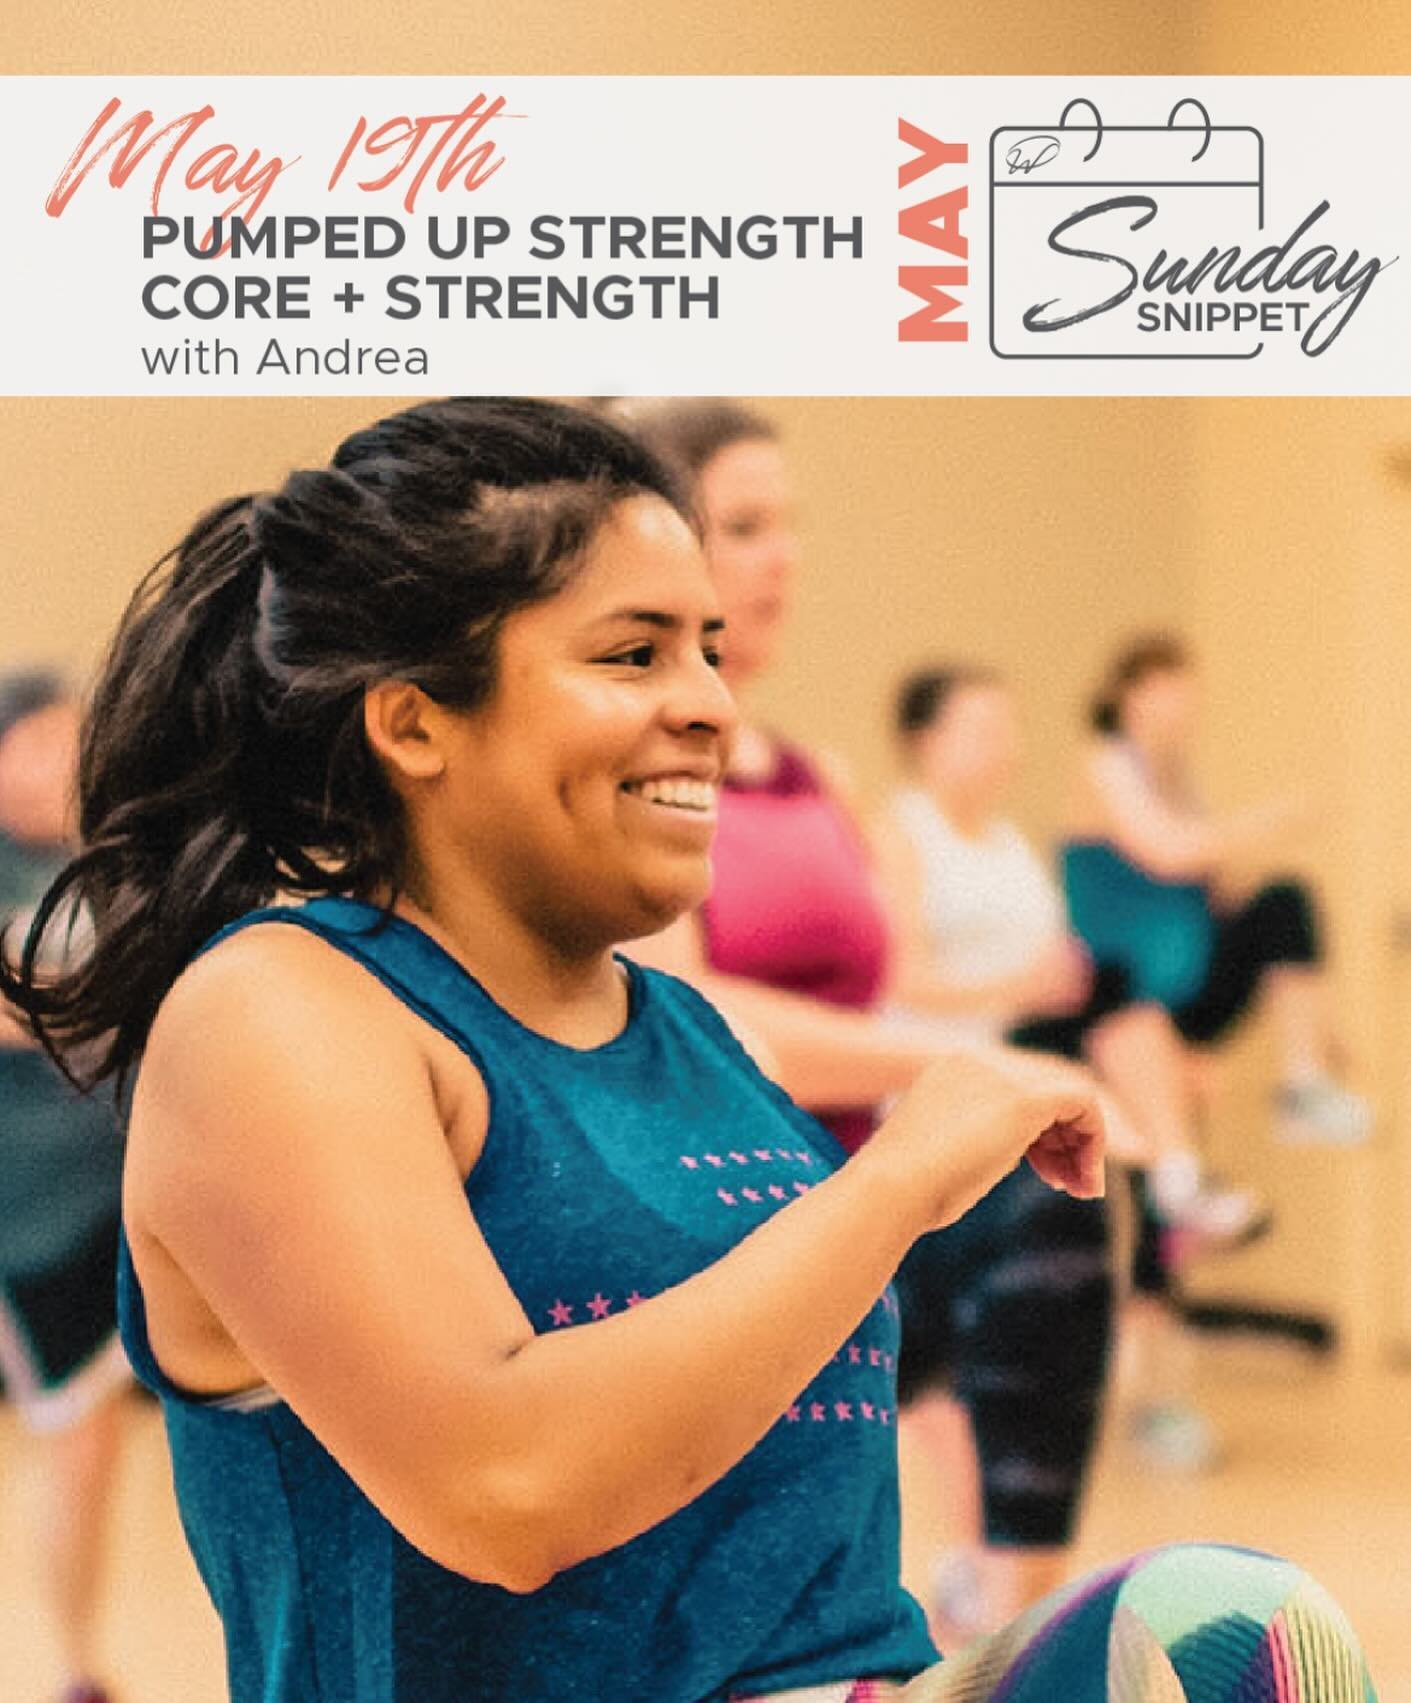 Join @andreacblum for some Pumped up Strength Core block + Strength tomorrow at 10 am 🎉